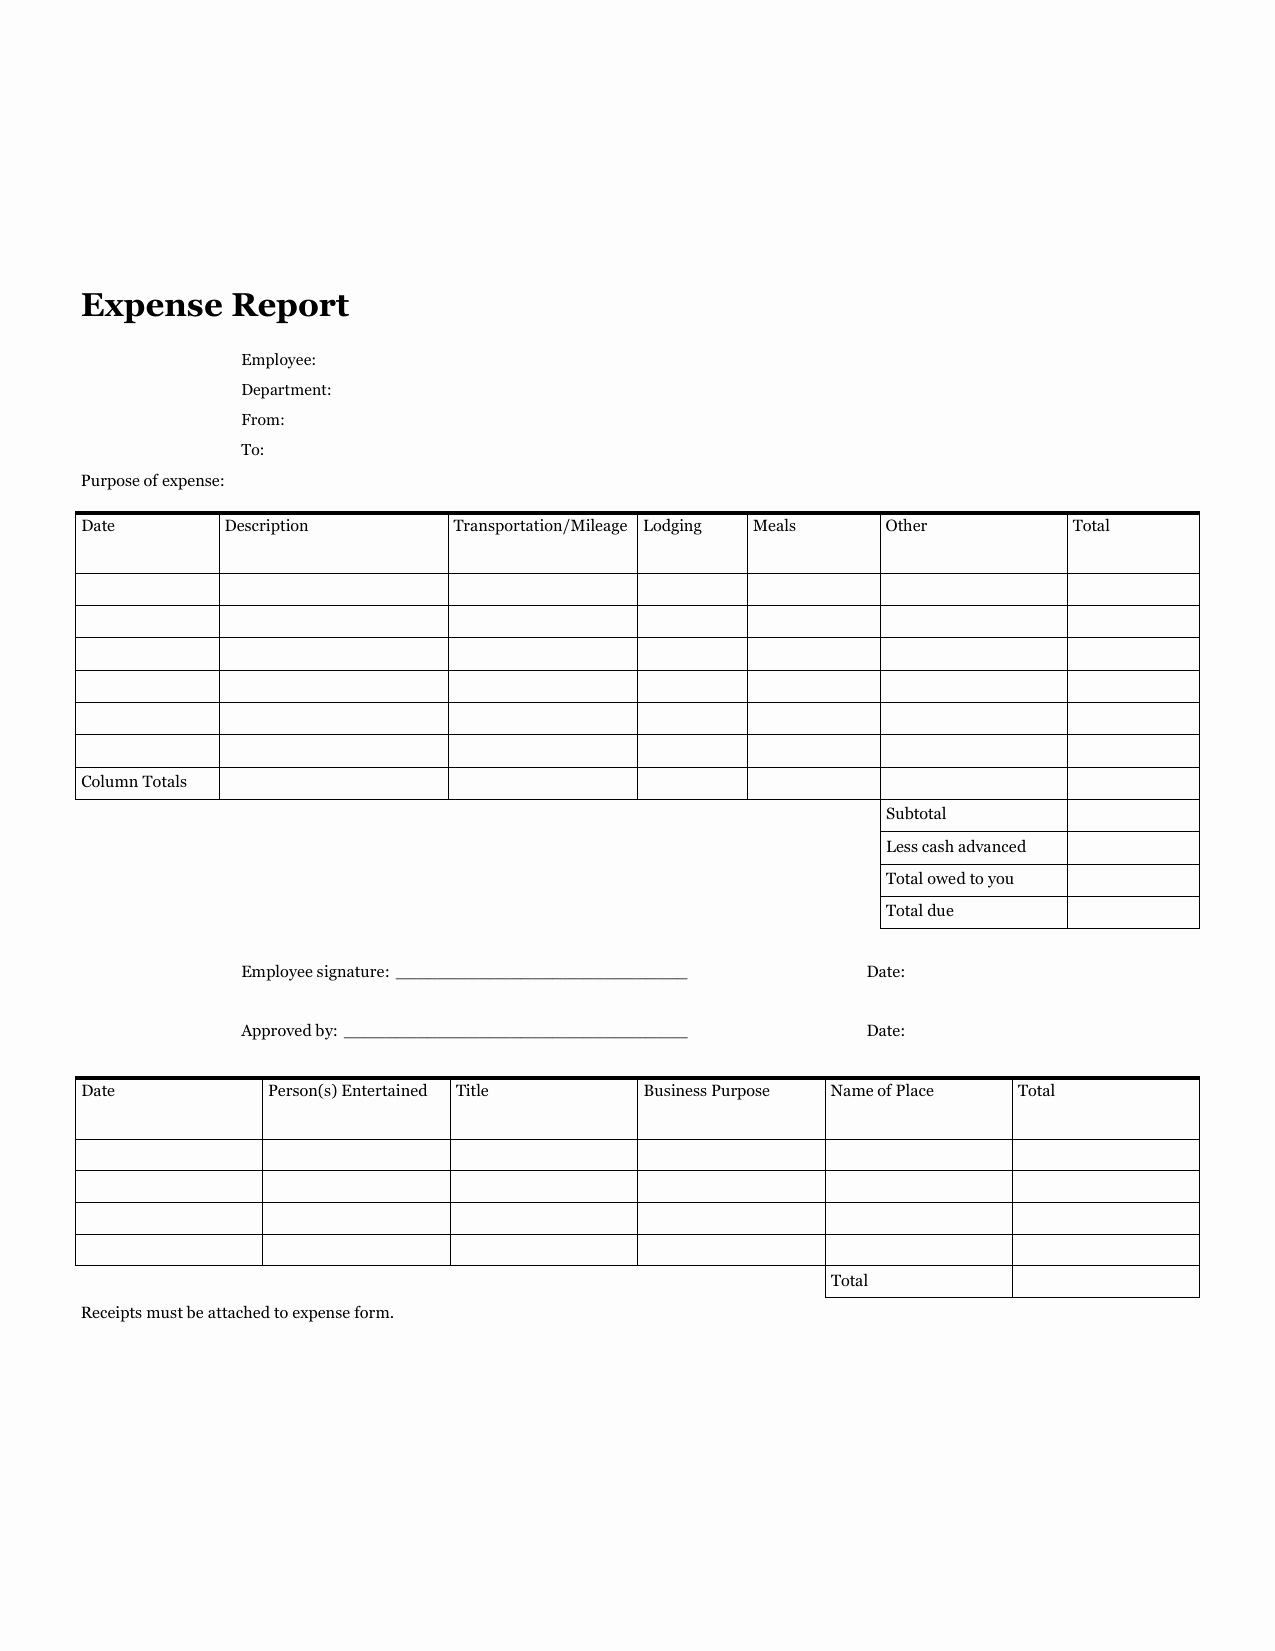 Expense Report form Template Unique Download Blank Expense Report form Pdf